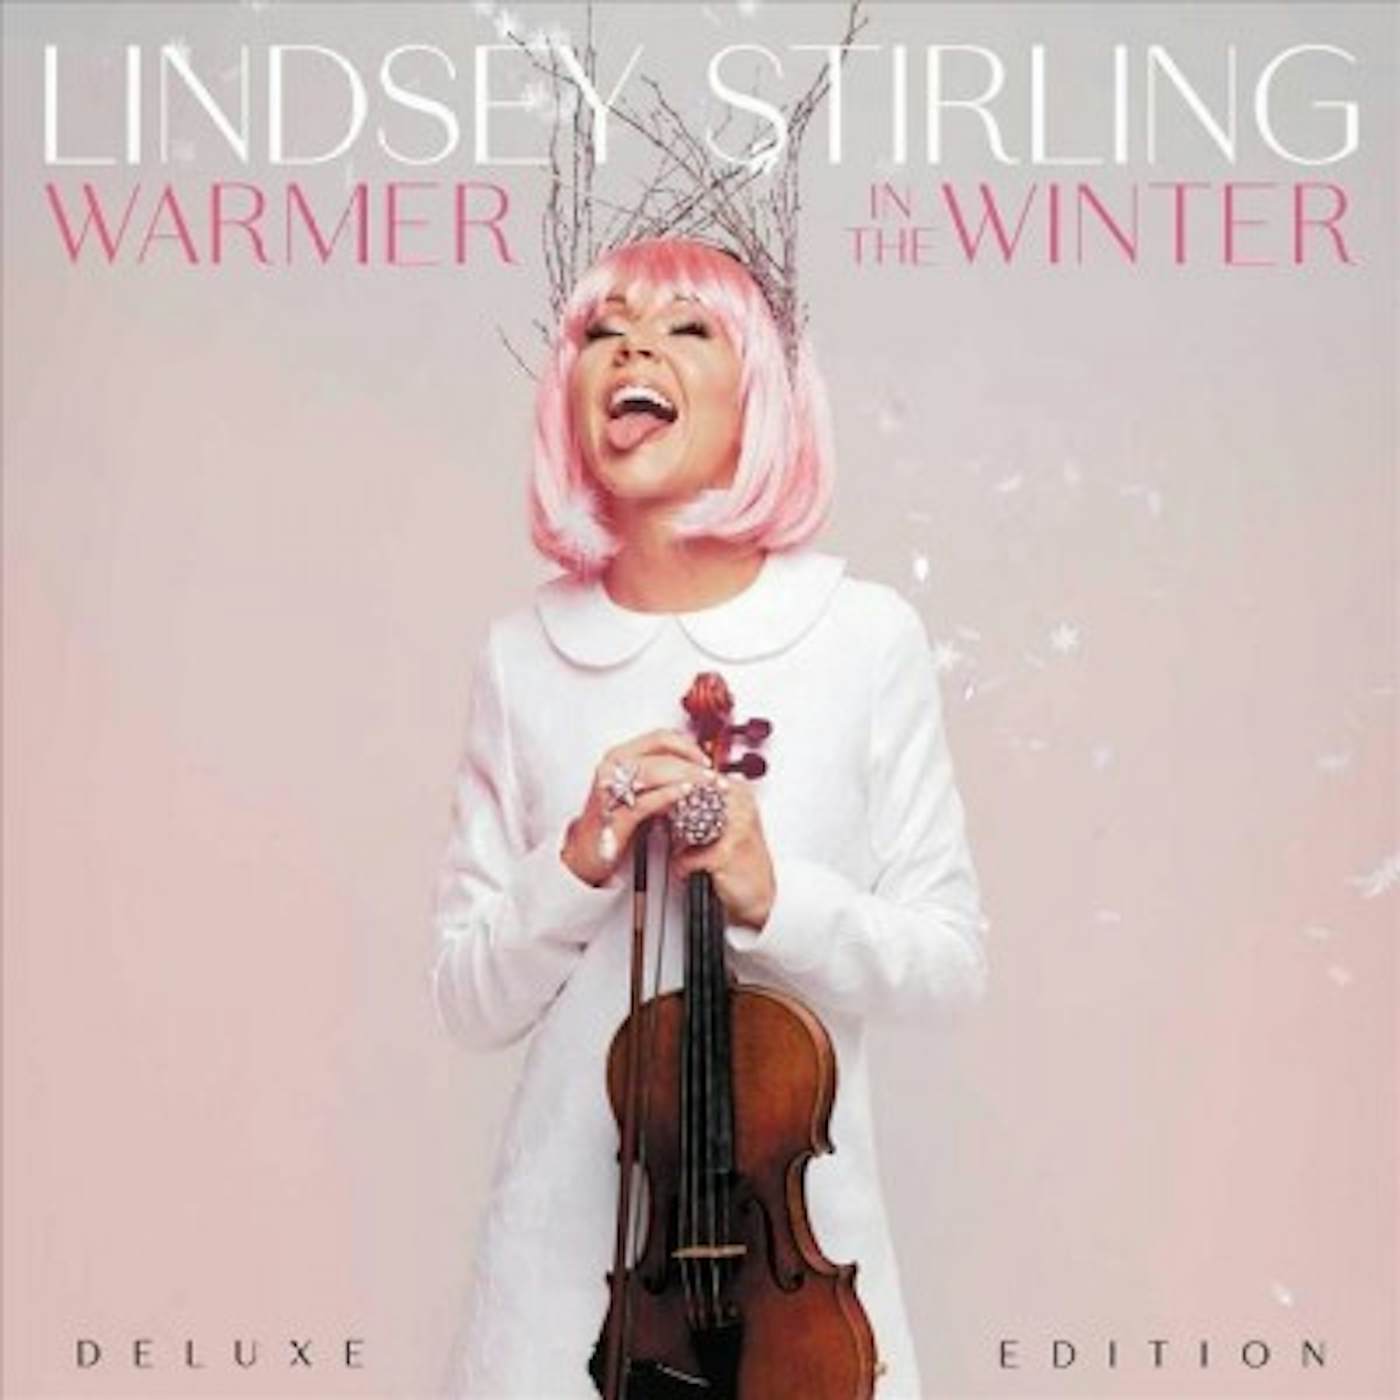 Lindsey Stirling WARMER IN THE WINTER (DELUXE EDITION) CD